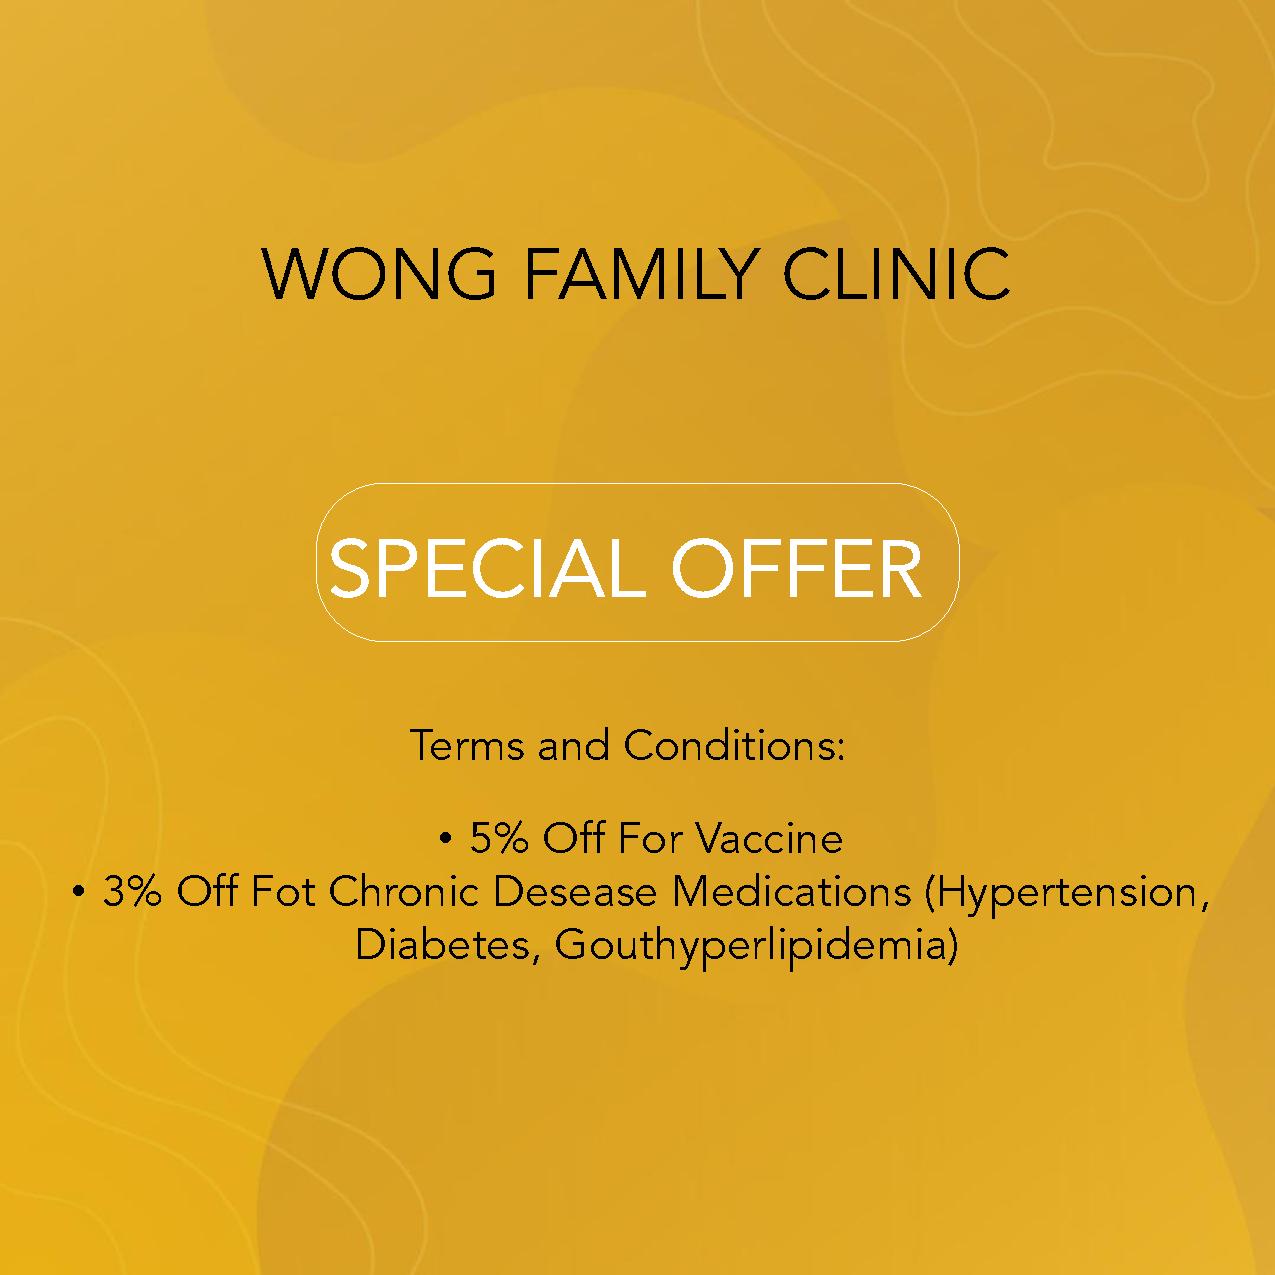 WONG FAMILY CLINIC